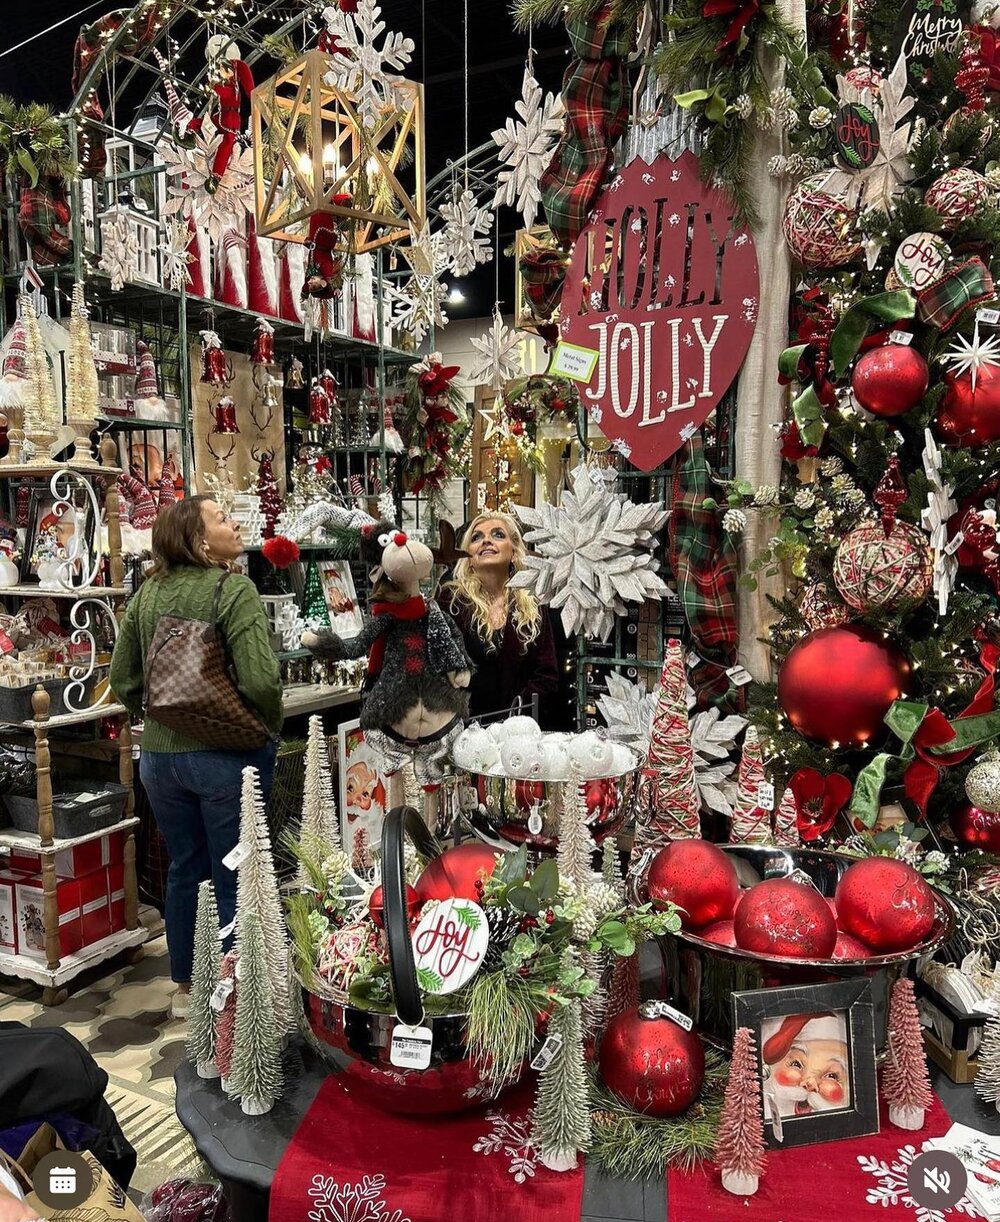 The most wonderful time of the year is almost here! We are gearing up for the @holidayboutiqueshows next week!!! Send us a DM if you want to join us for some holiday retail therapy next weekend!! 🛍️🎄